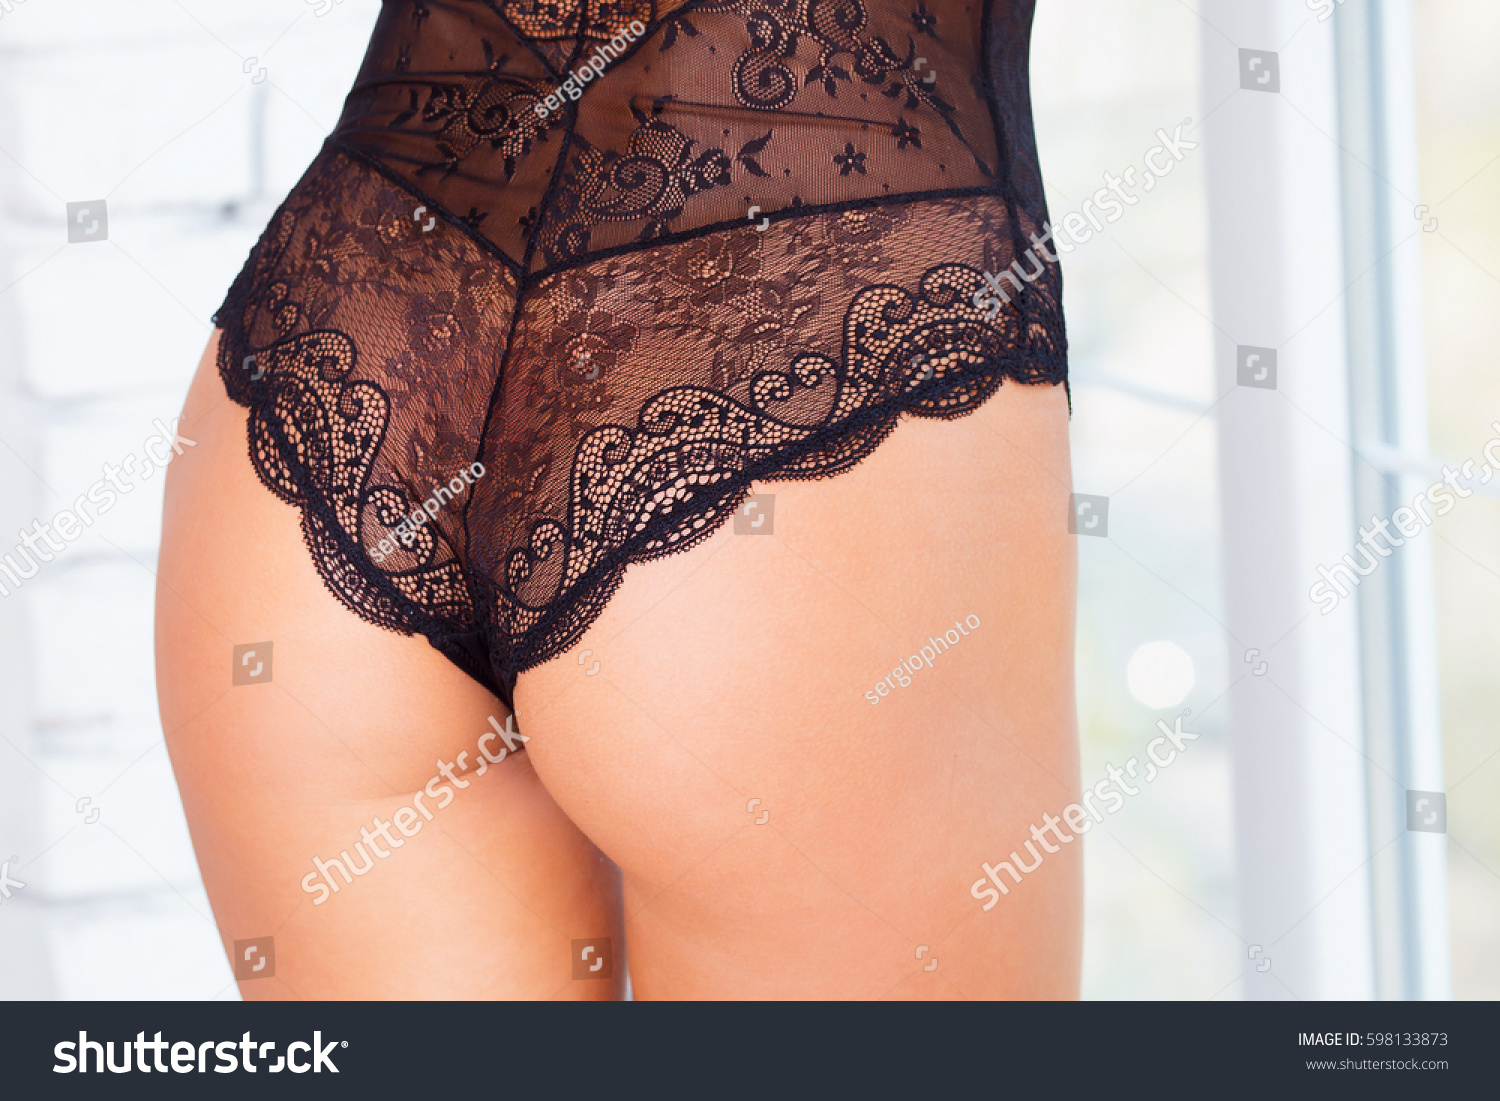 Perfect Ass In Lingerie